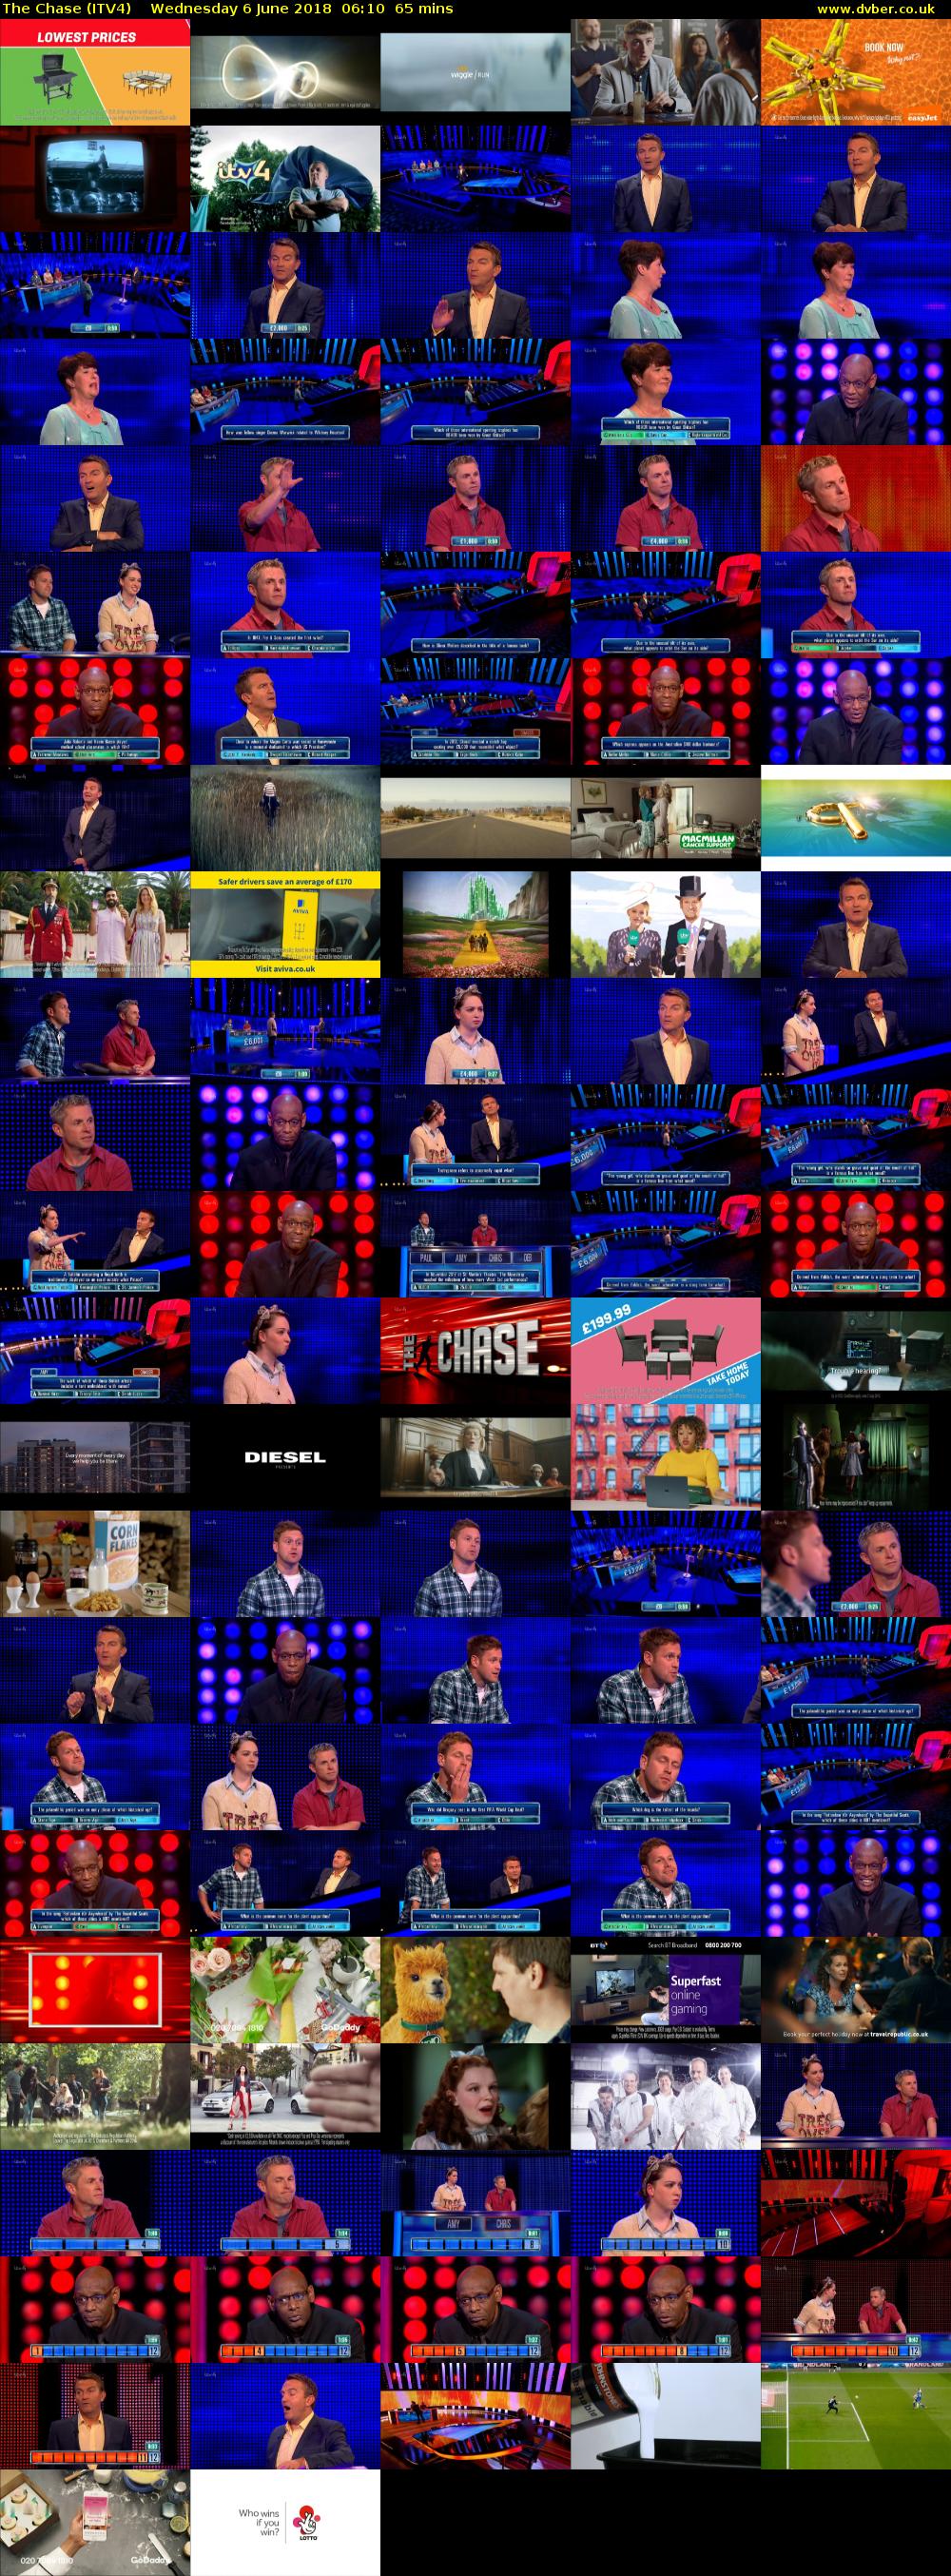 The Chase (ITV4) Wednesday 6 June 2018 06:10 - 07:15